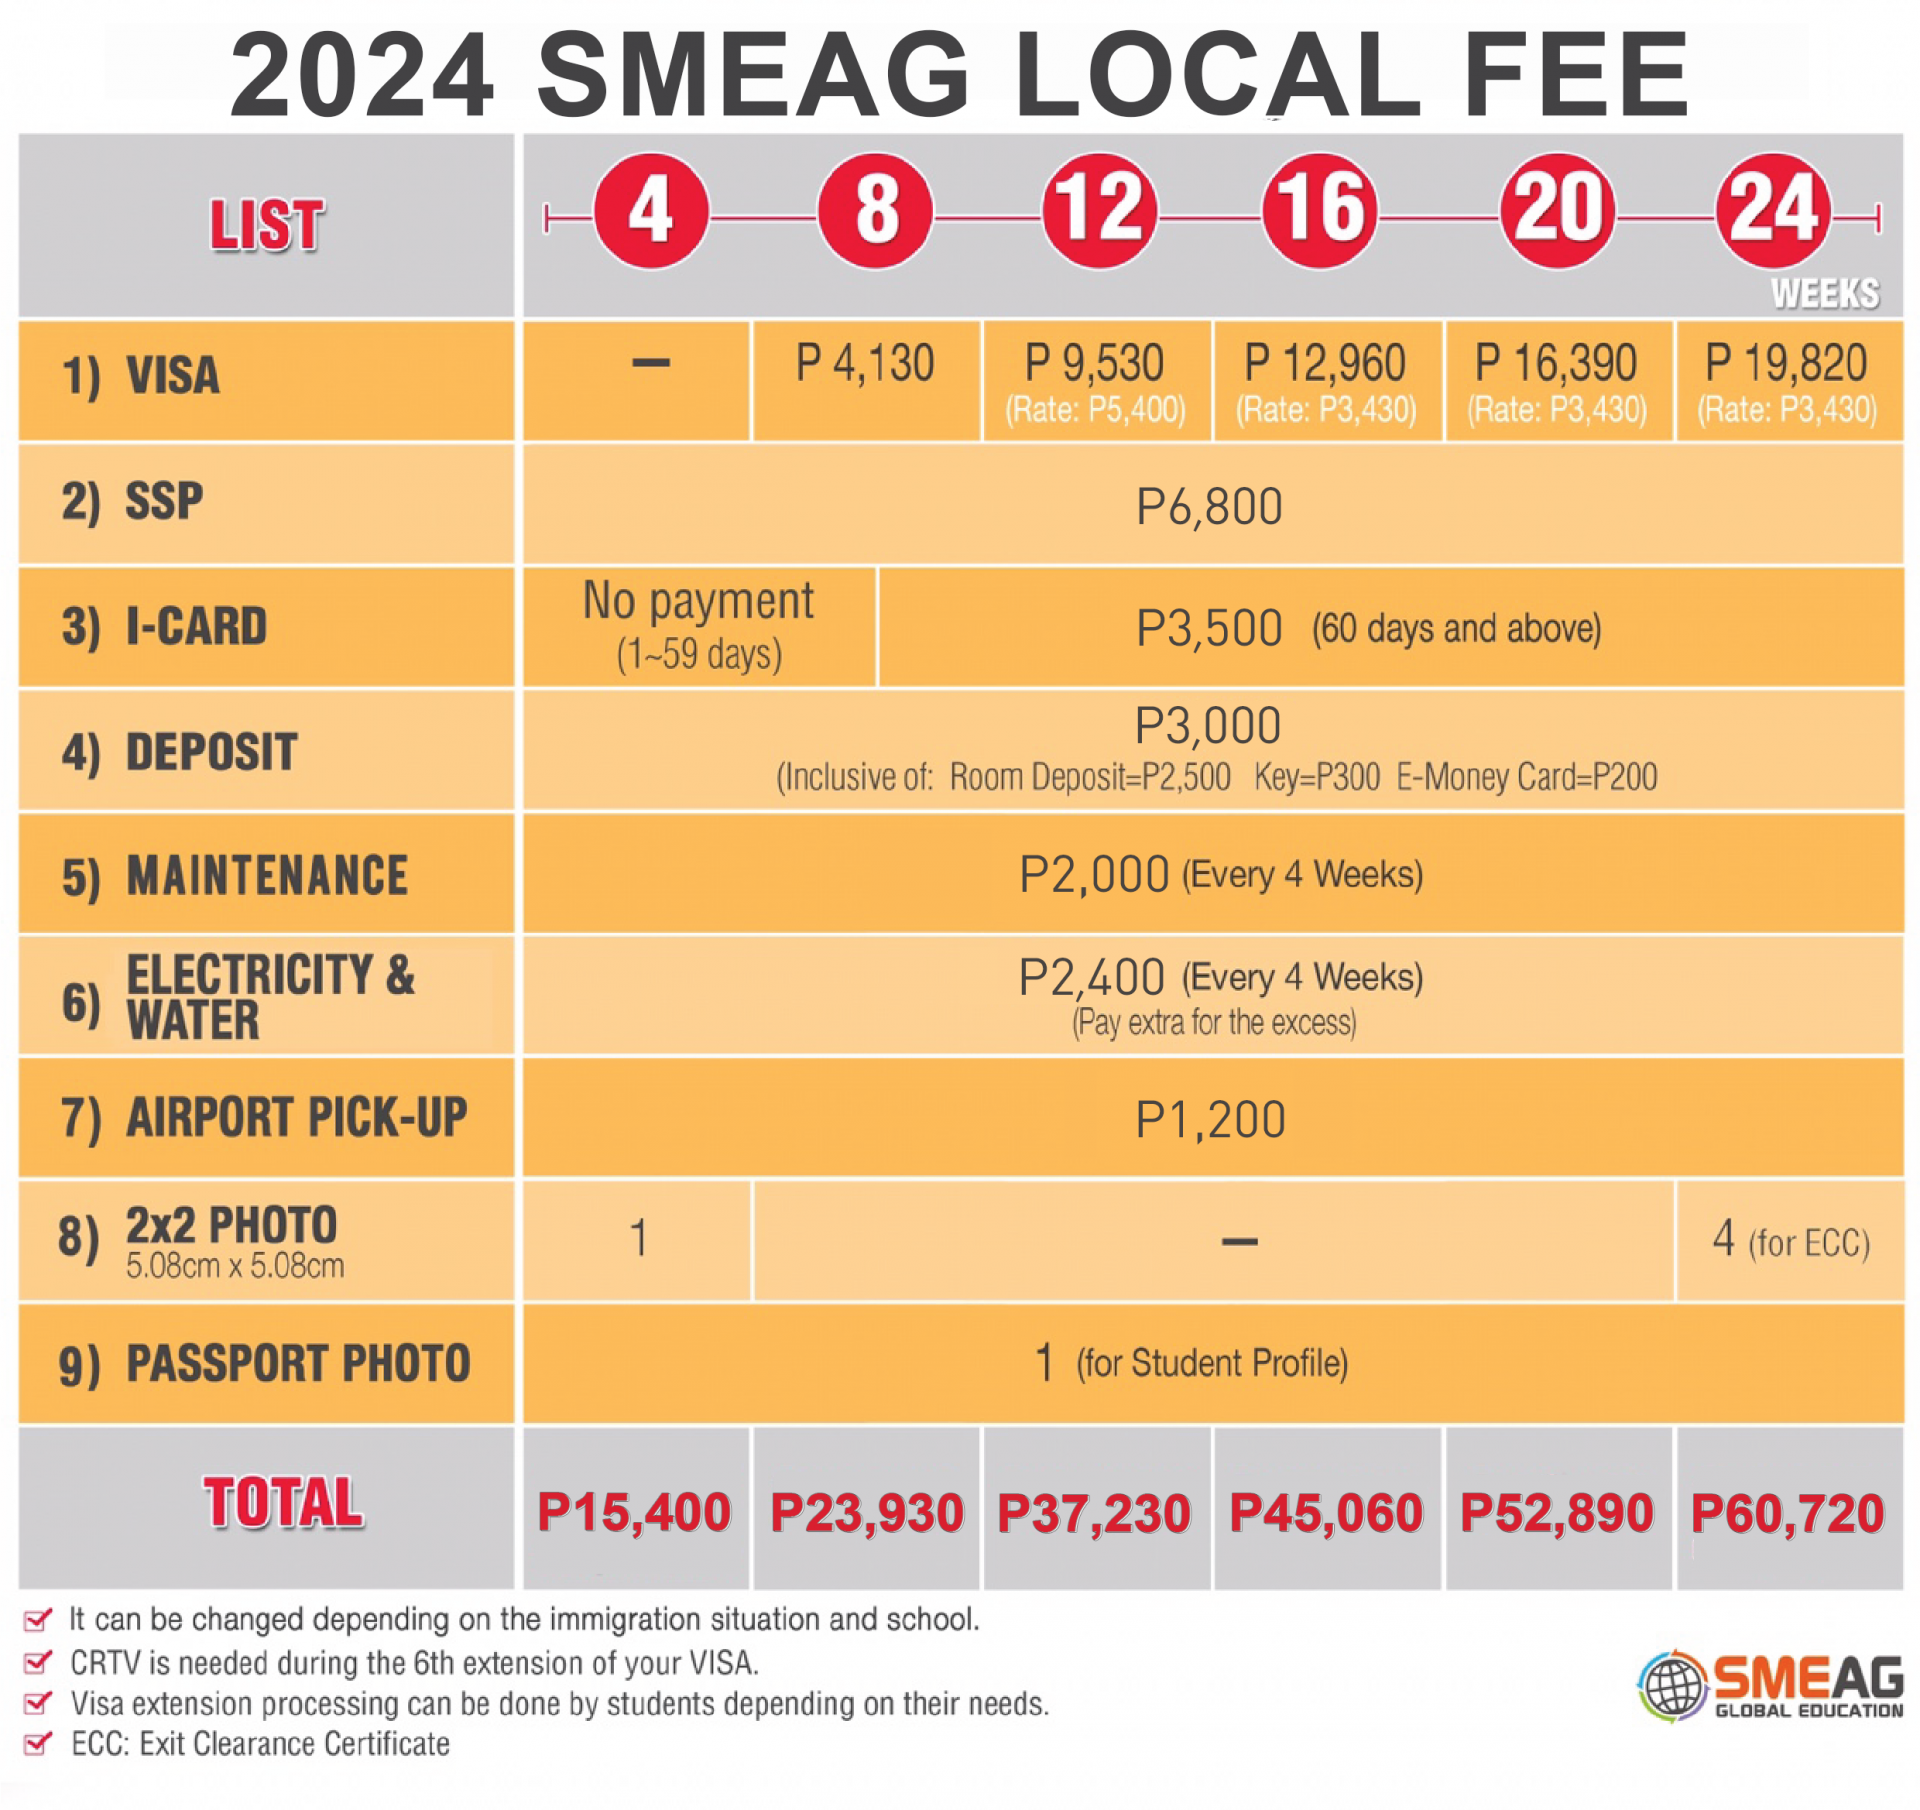 (update May 6) 2022 Local fee